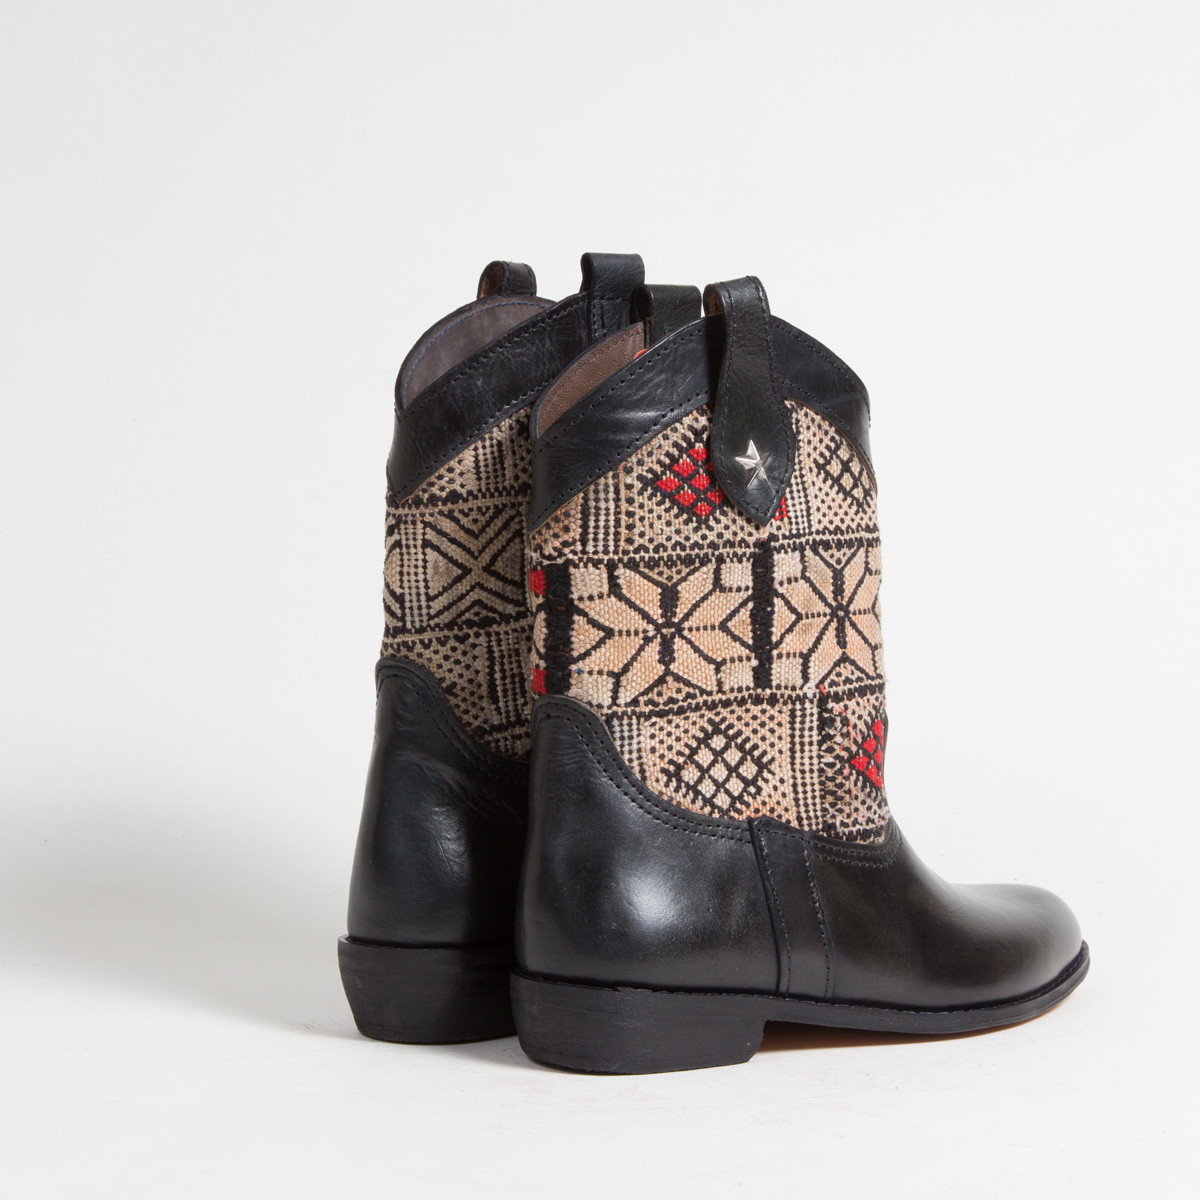 Bottines Kilim cuir mababouche artisanales (Réf. MN8-39)